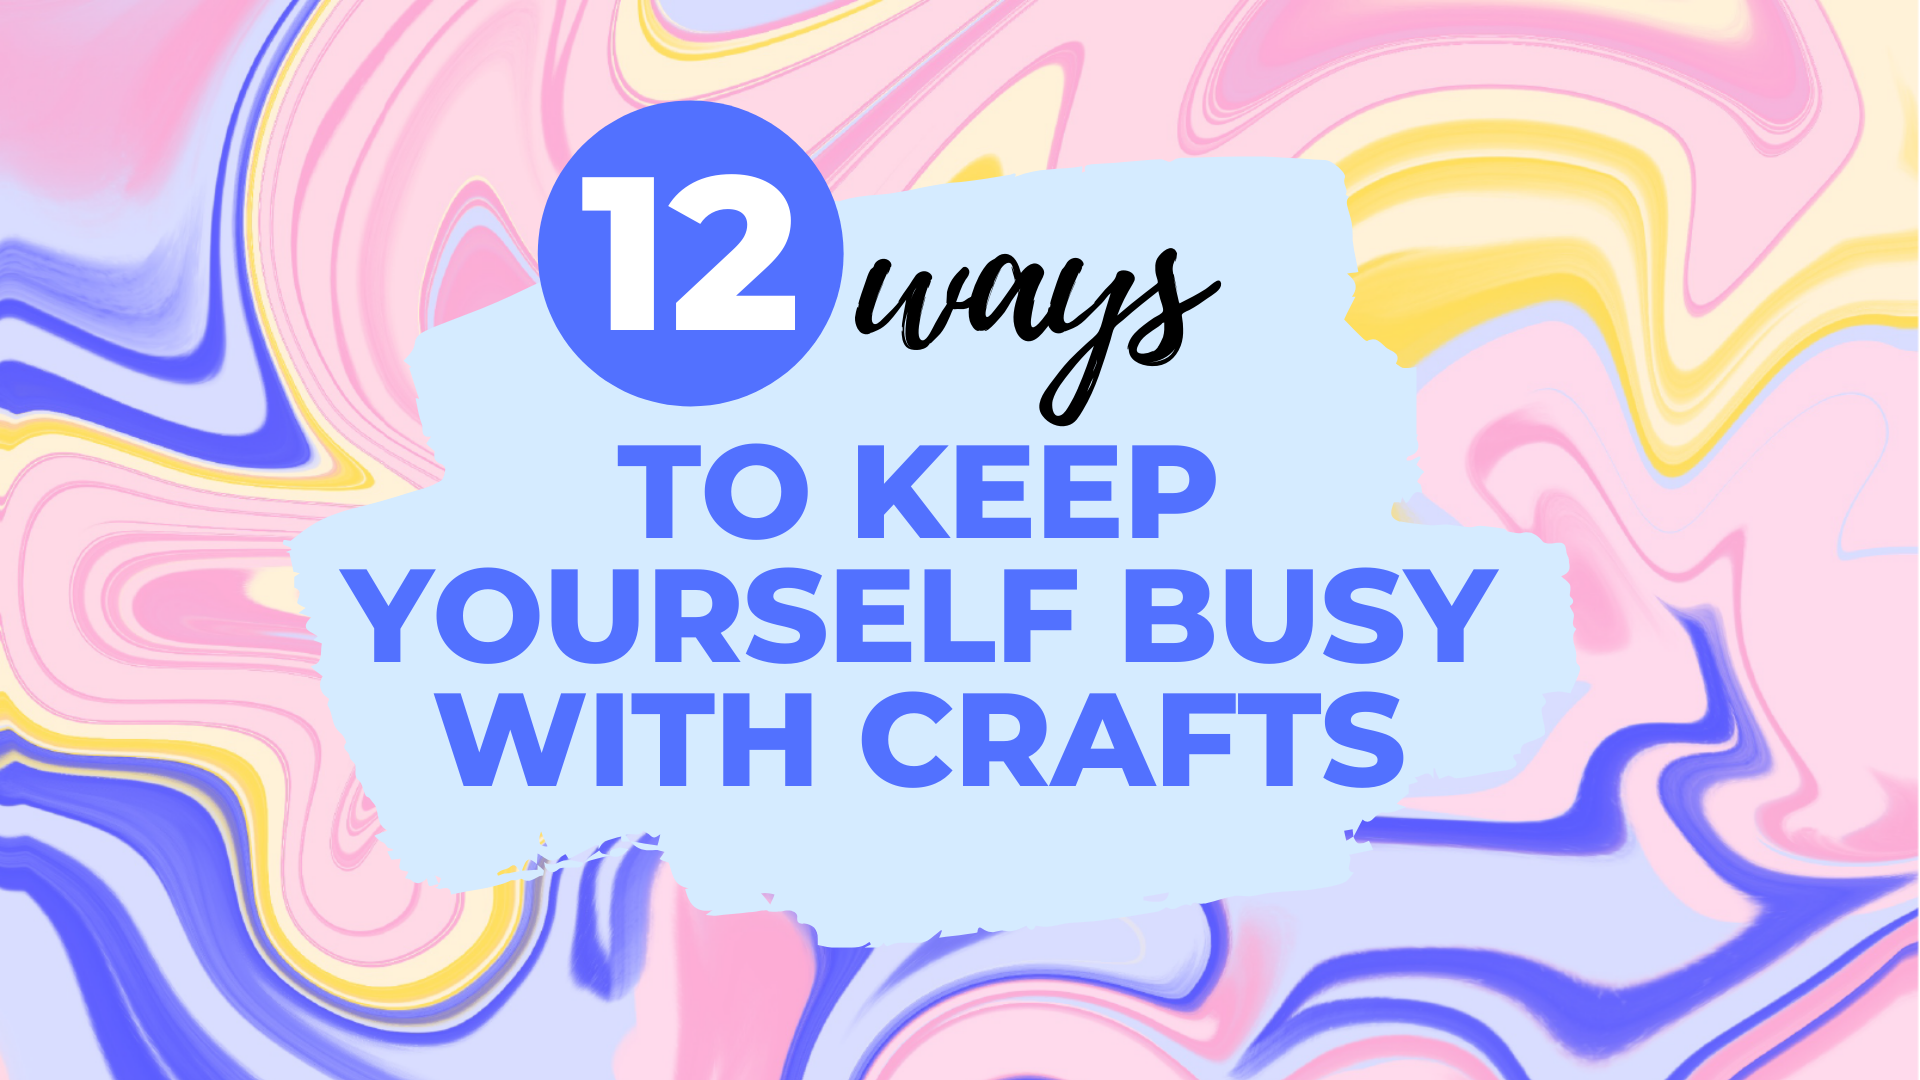 47 Fun Craft Projects for Adults That Aren't Boring - Craftsy Hacks